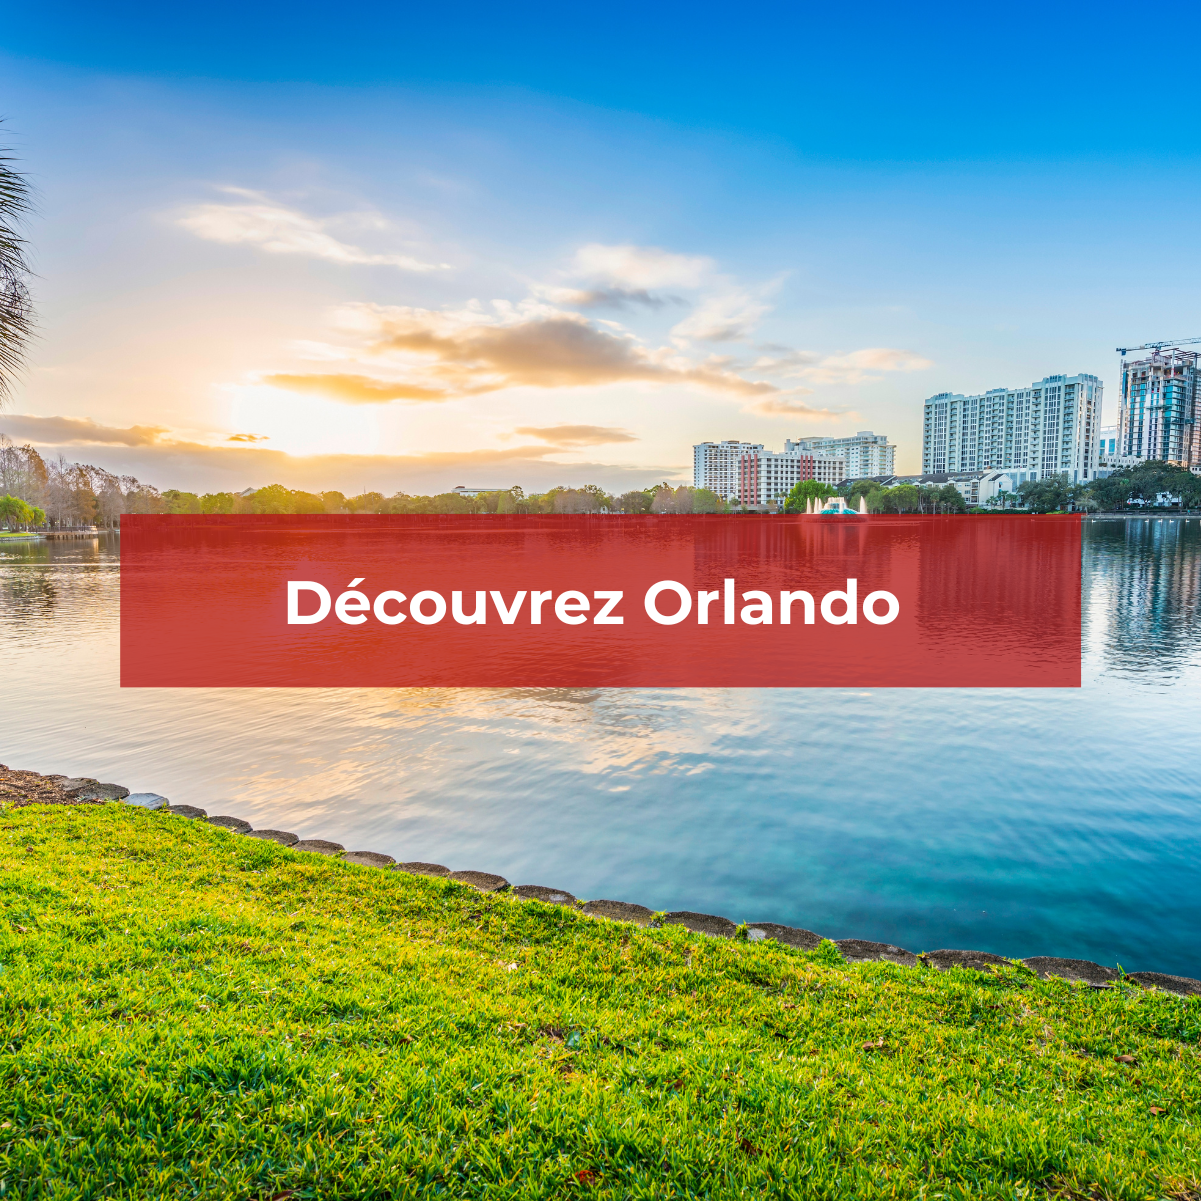 Experience the city of Orlando with TourMaG